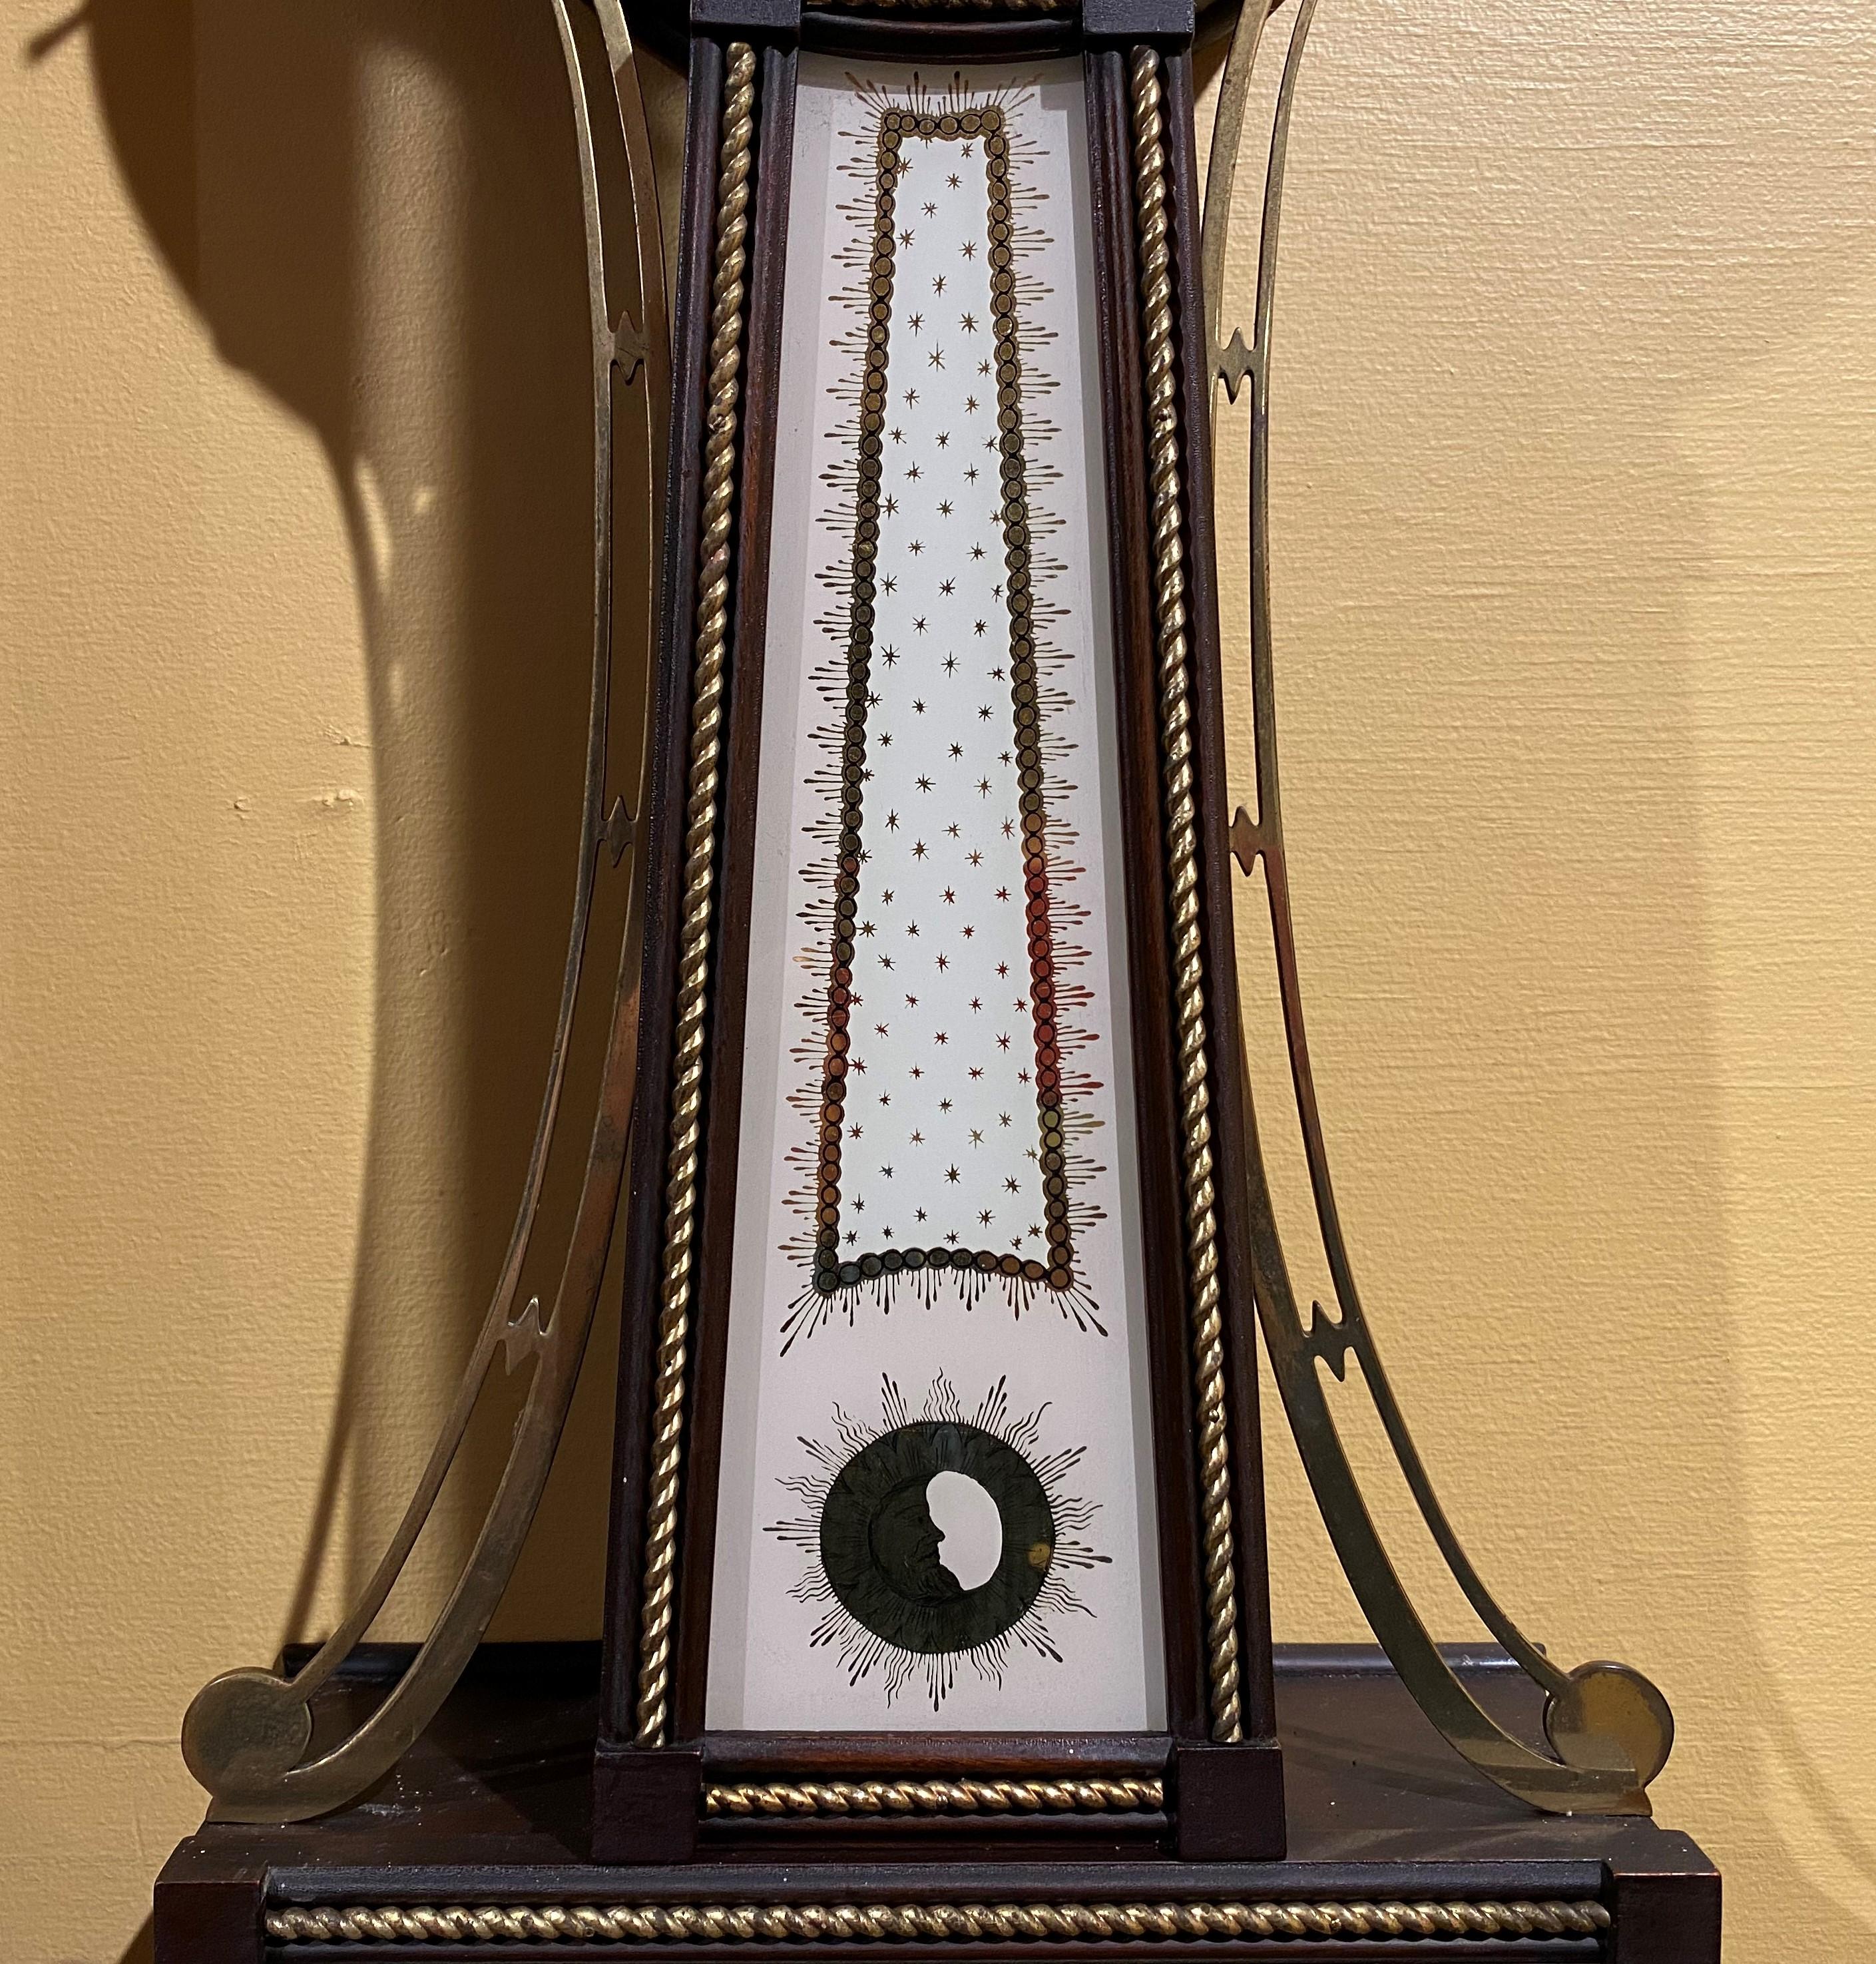 American Waltham 8 Day Banjo Clock for Shreve Crump and Low, Simon Willard Patent For Sale